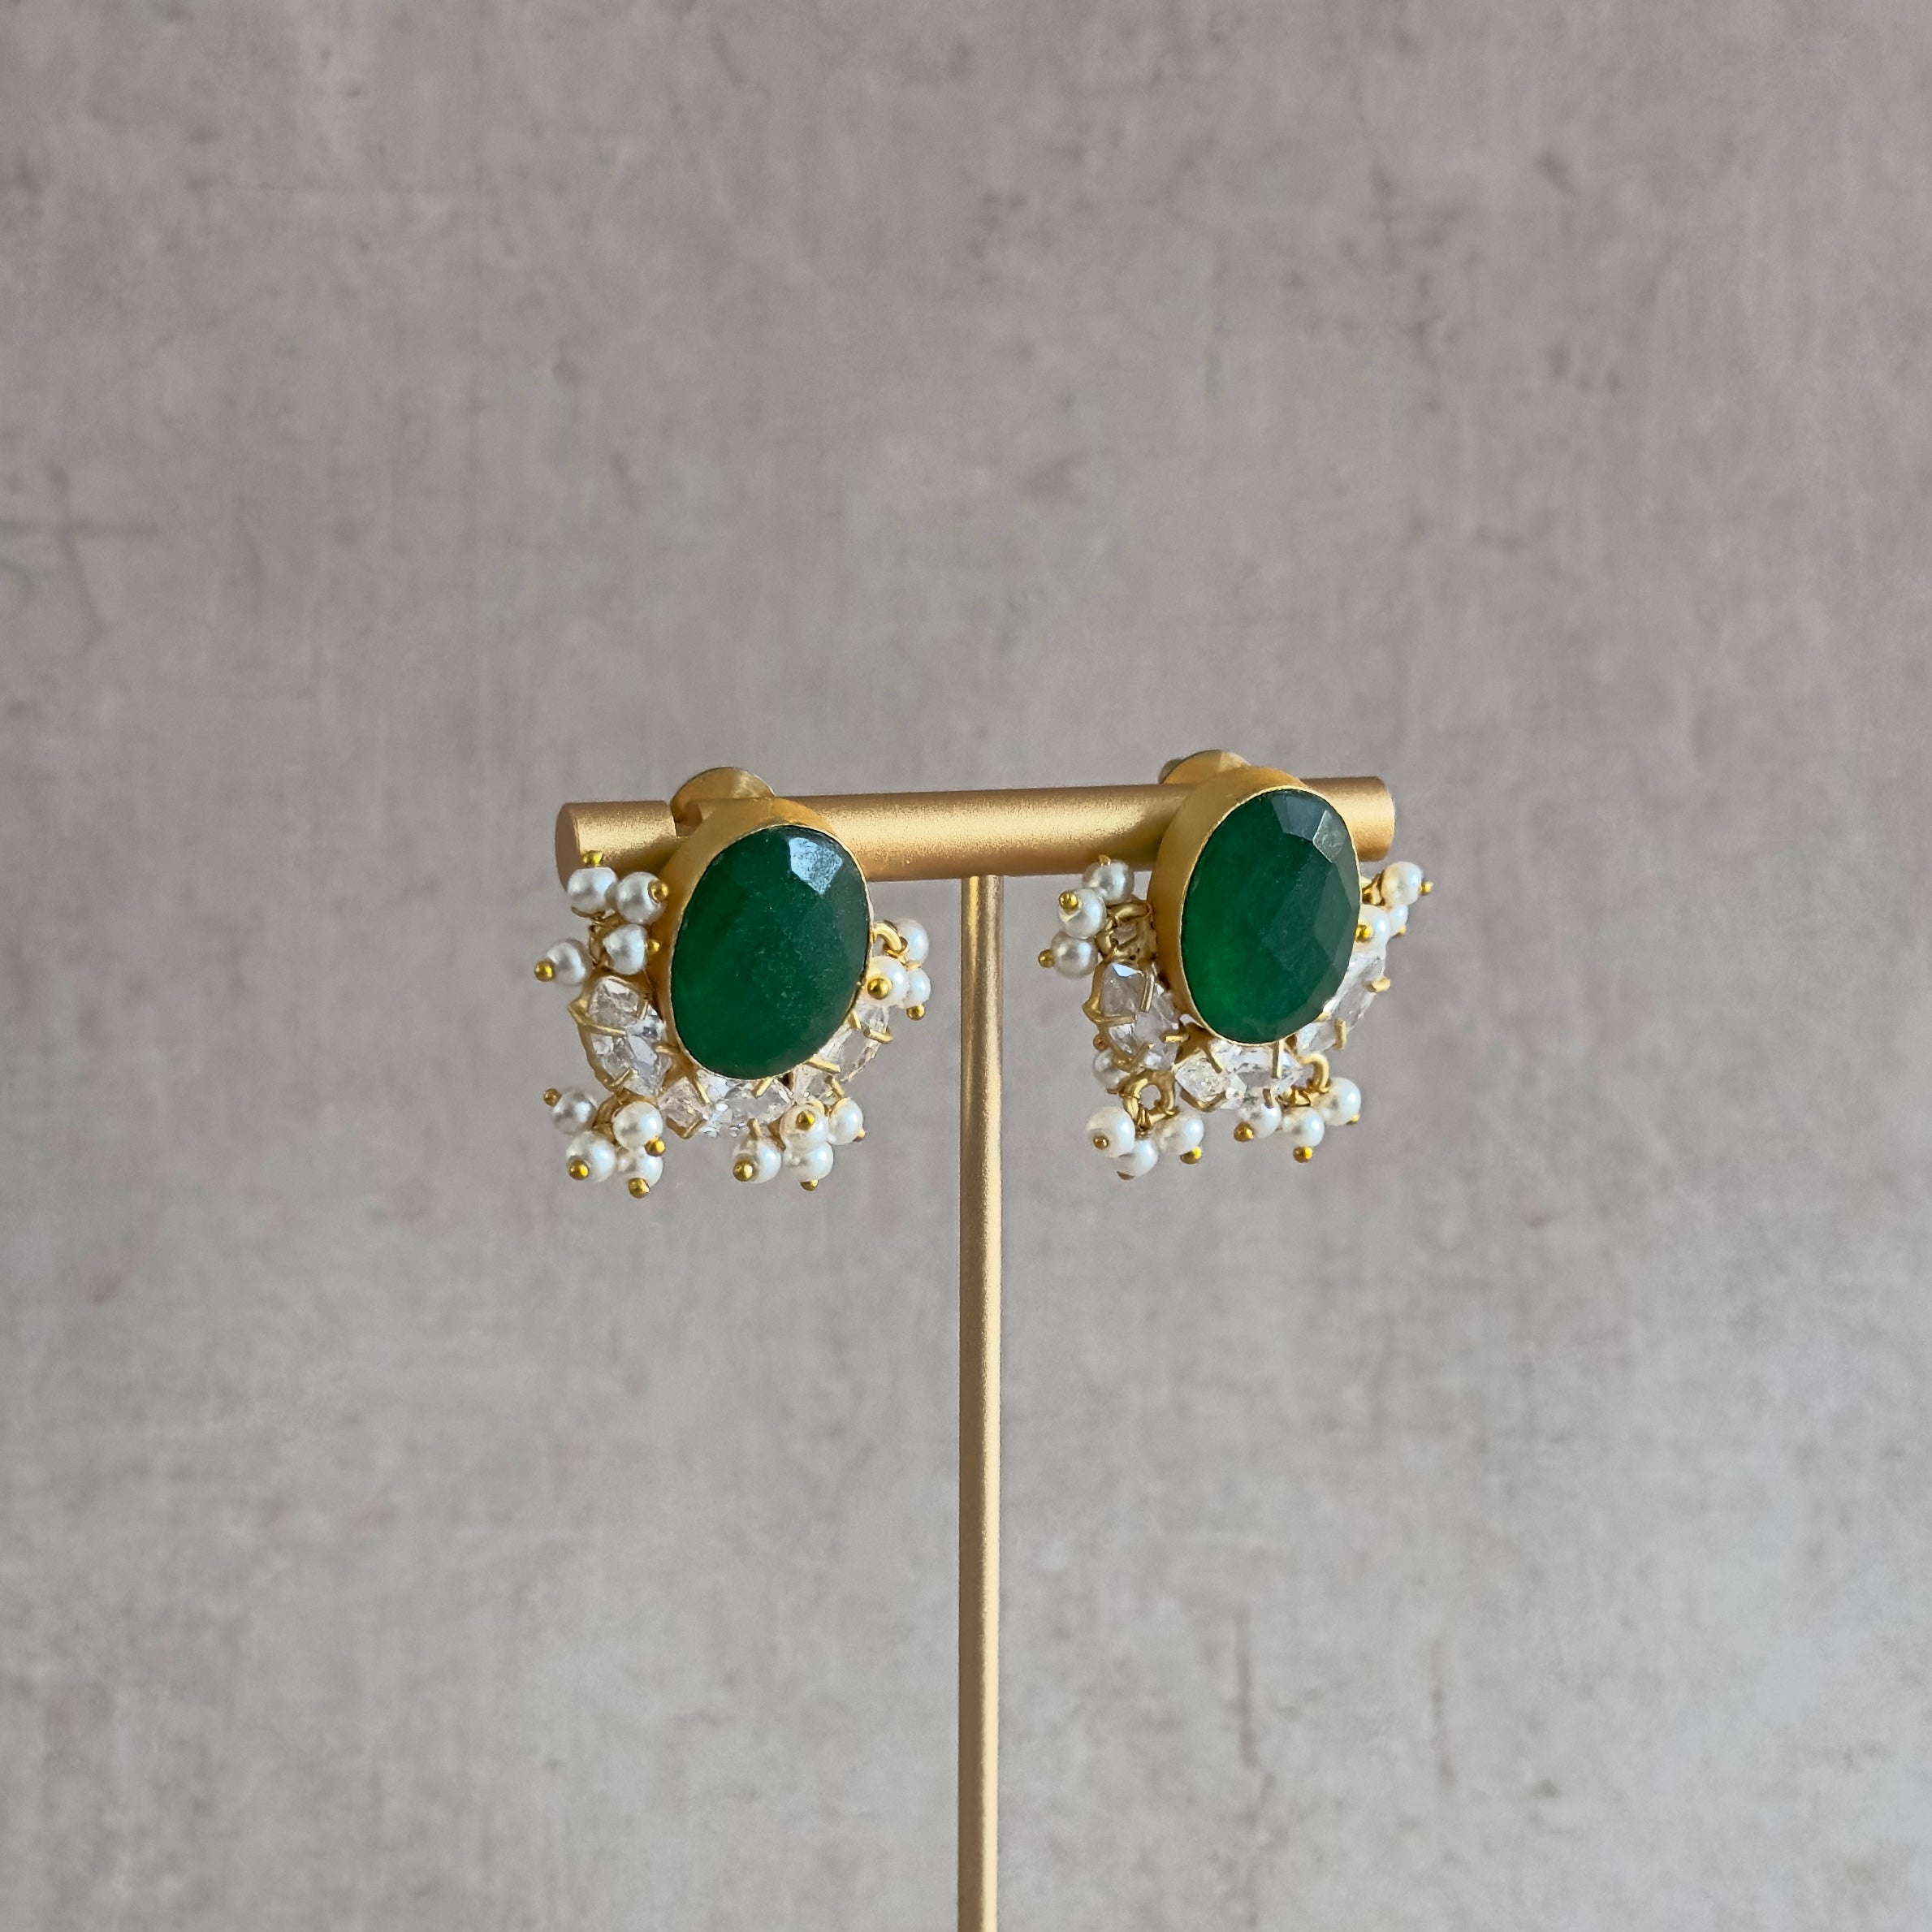 Add a pop of color to your outfit with our Classic Green Crystal Stud Earrings. The vibrant green stones are beautifully accented with cz crystals, adding a touch of sparkle to the classic design. Elevate your look with these elegant earrings.